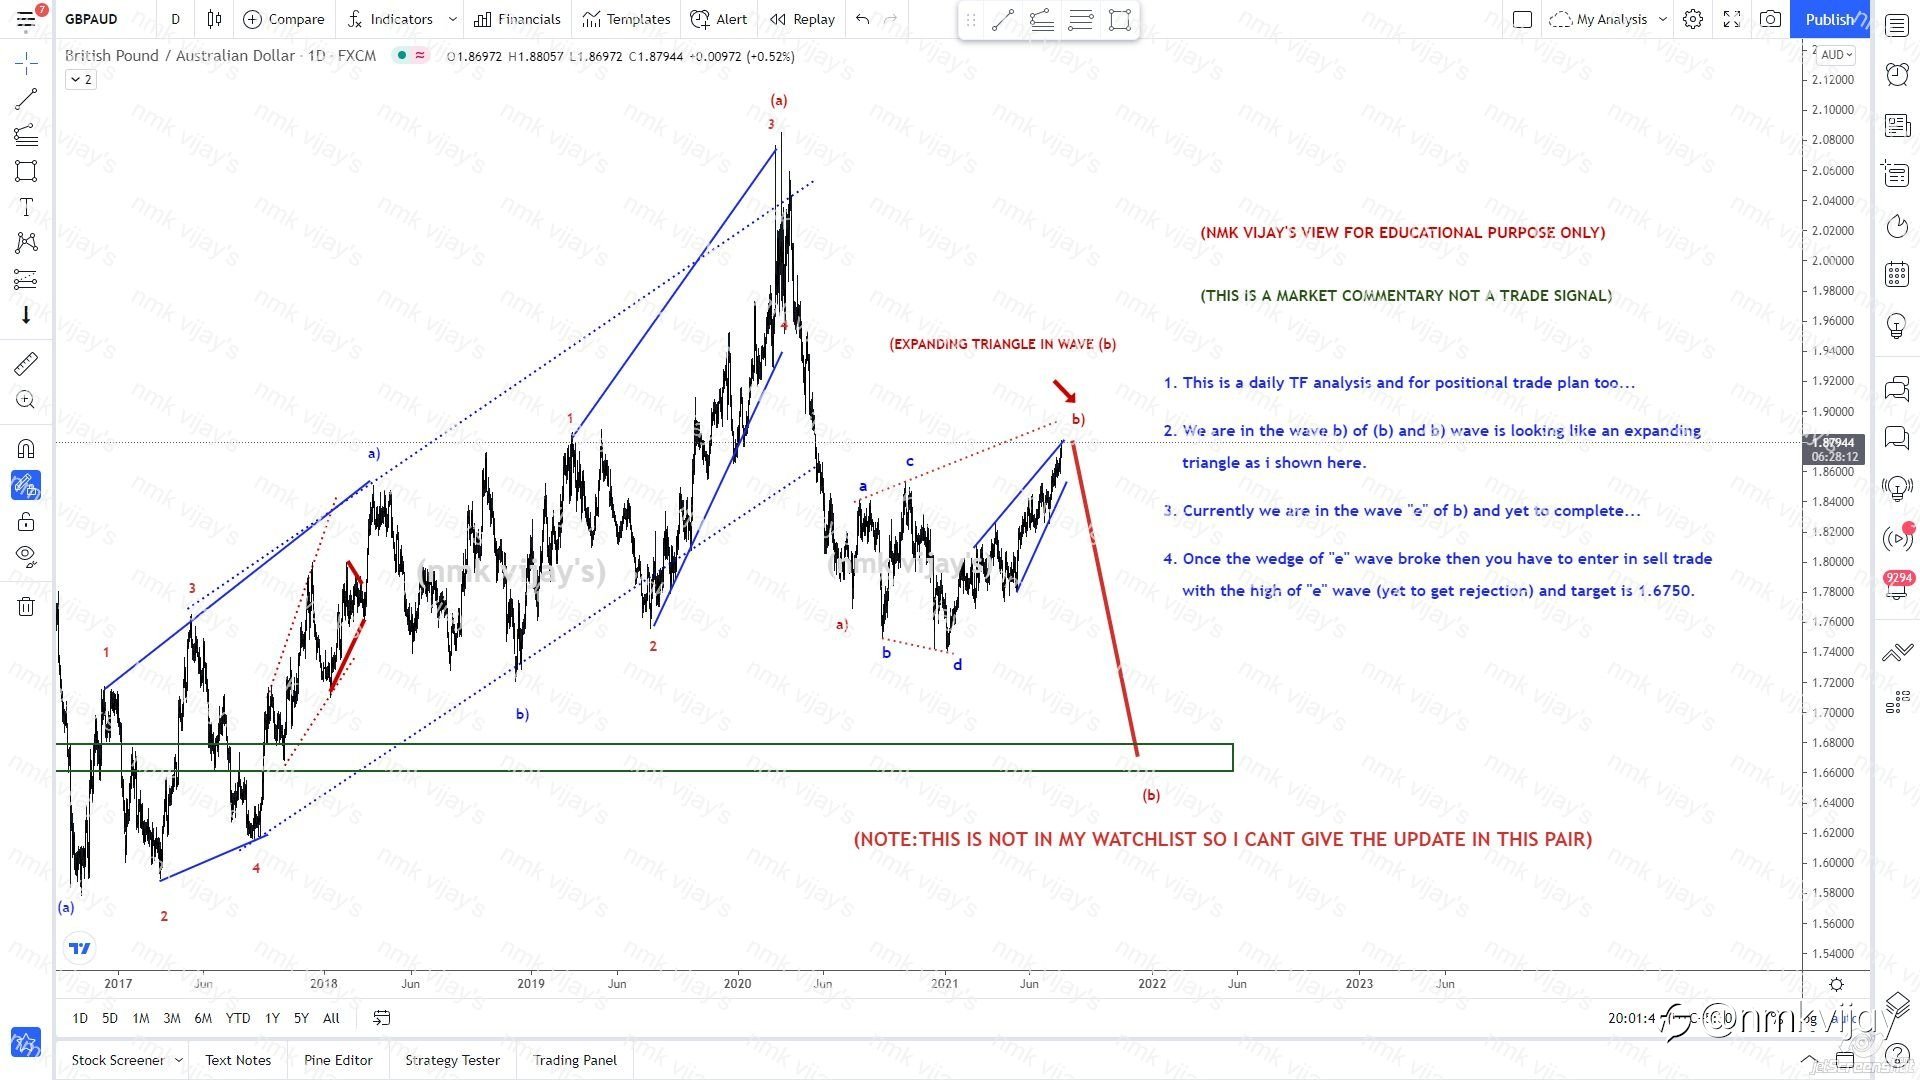 GBPAUD-Seems b) wave is expanding triangle with get reject soon?